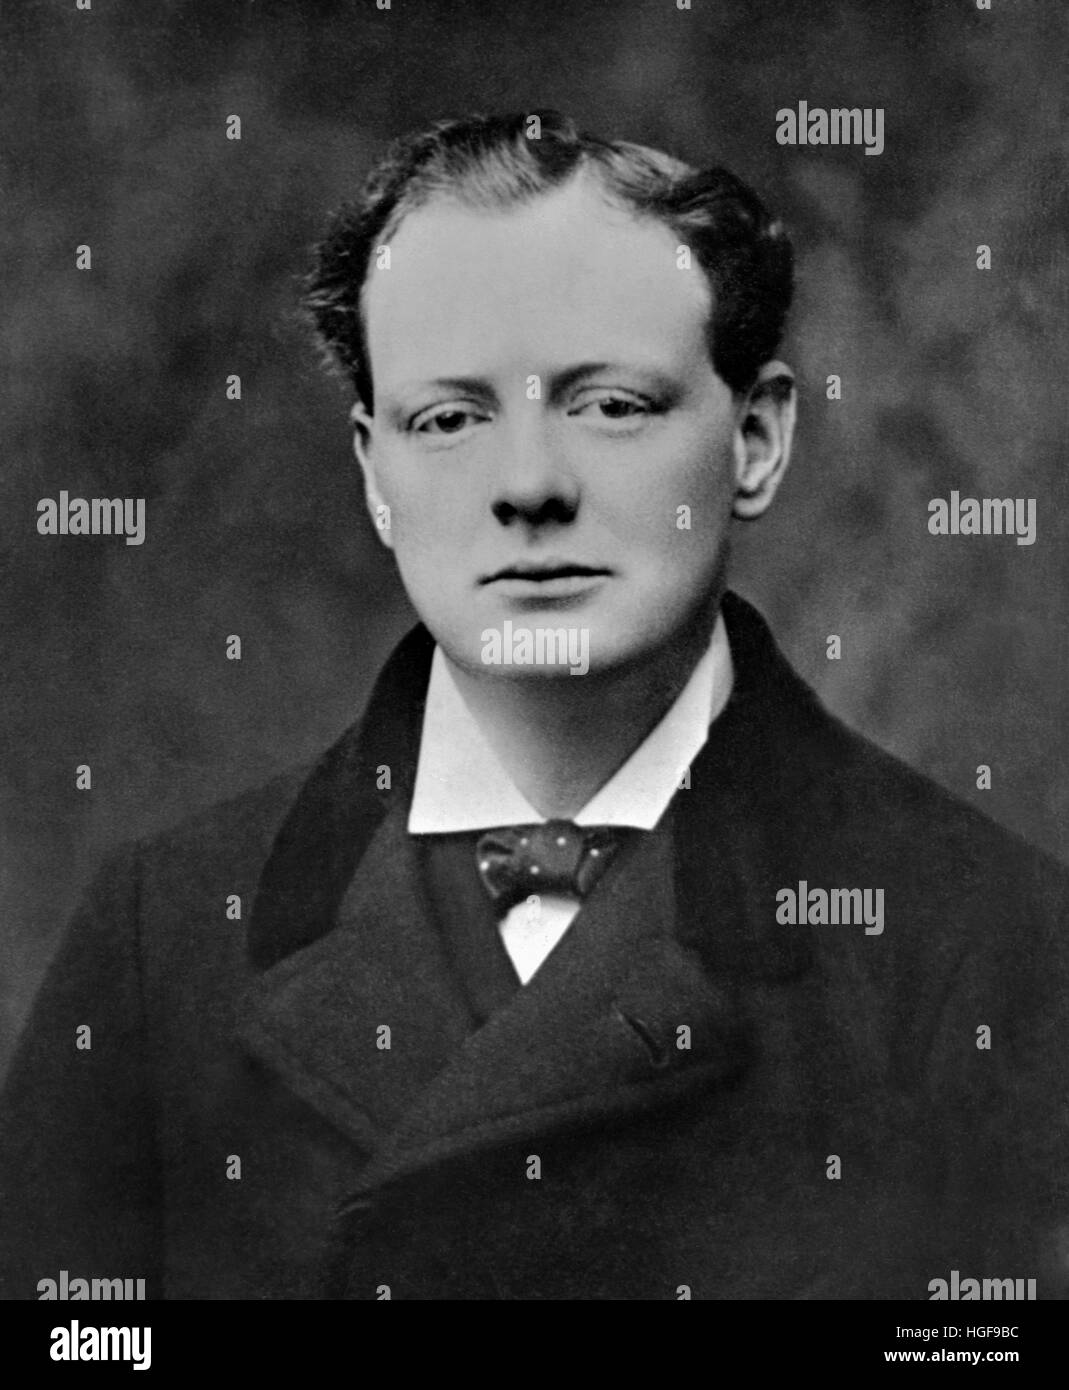 Churchill elected conservative MP for Oldham. Age 25. His first year in Parliament. 1901 Stock Photo